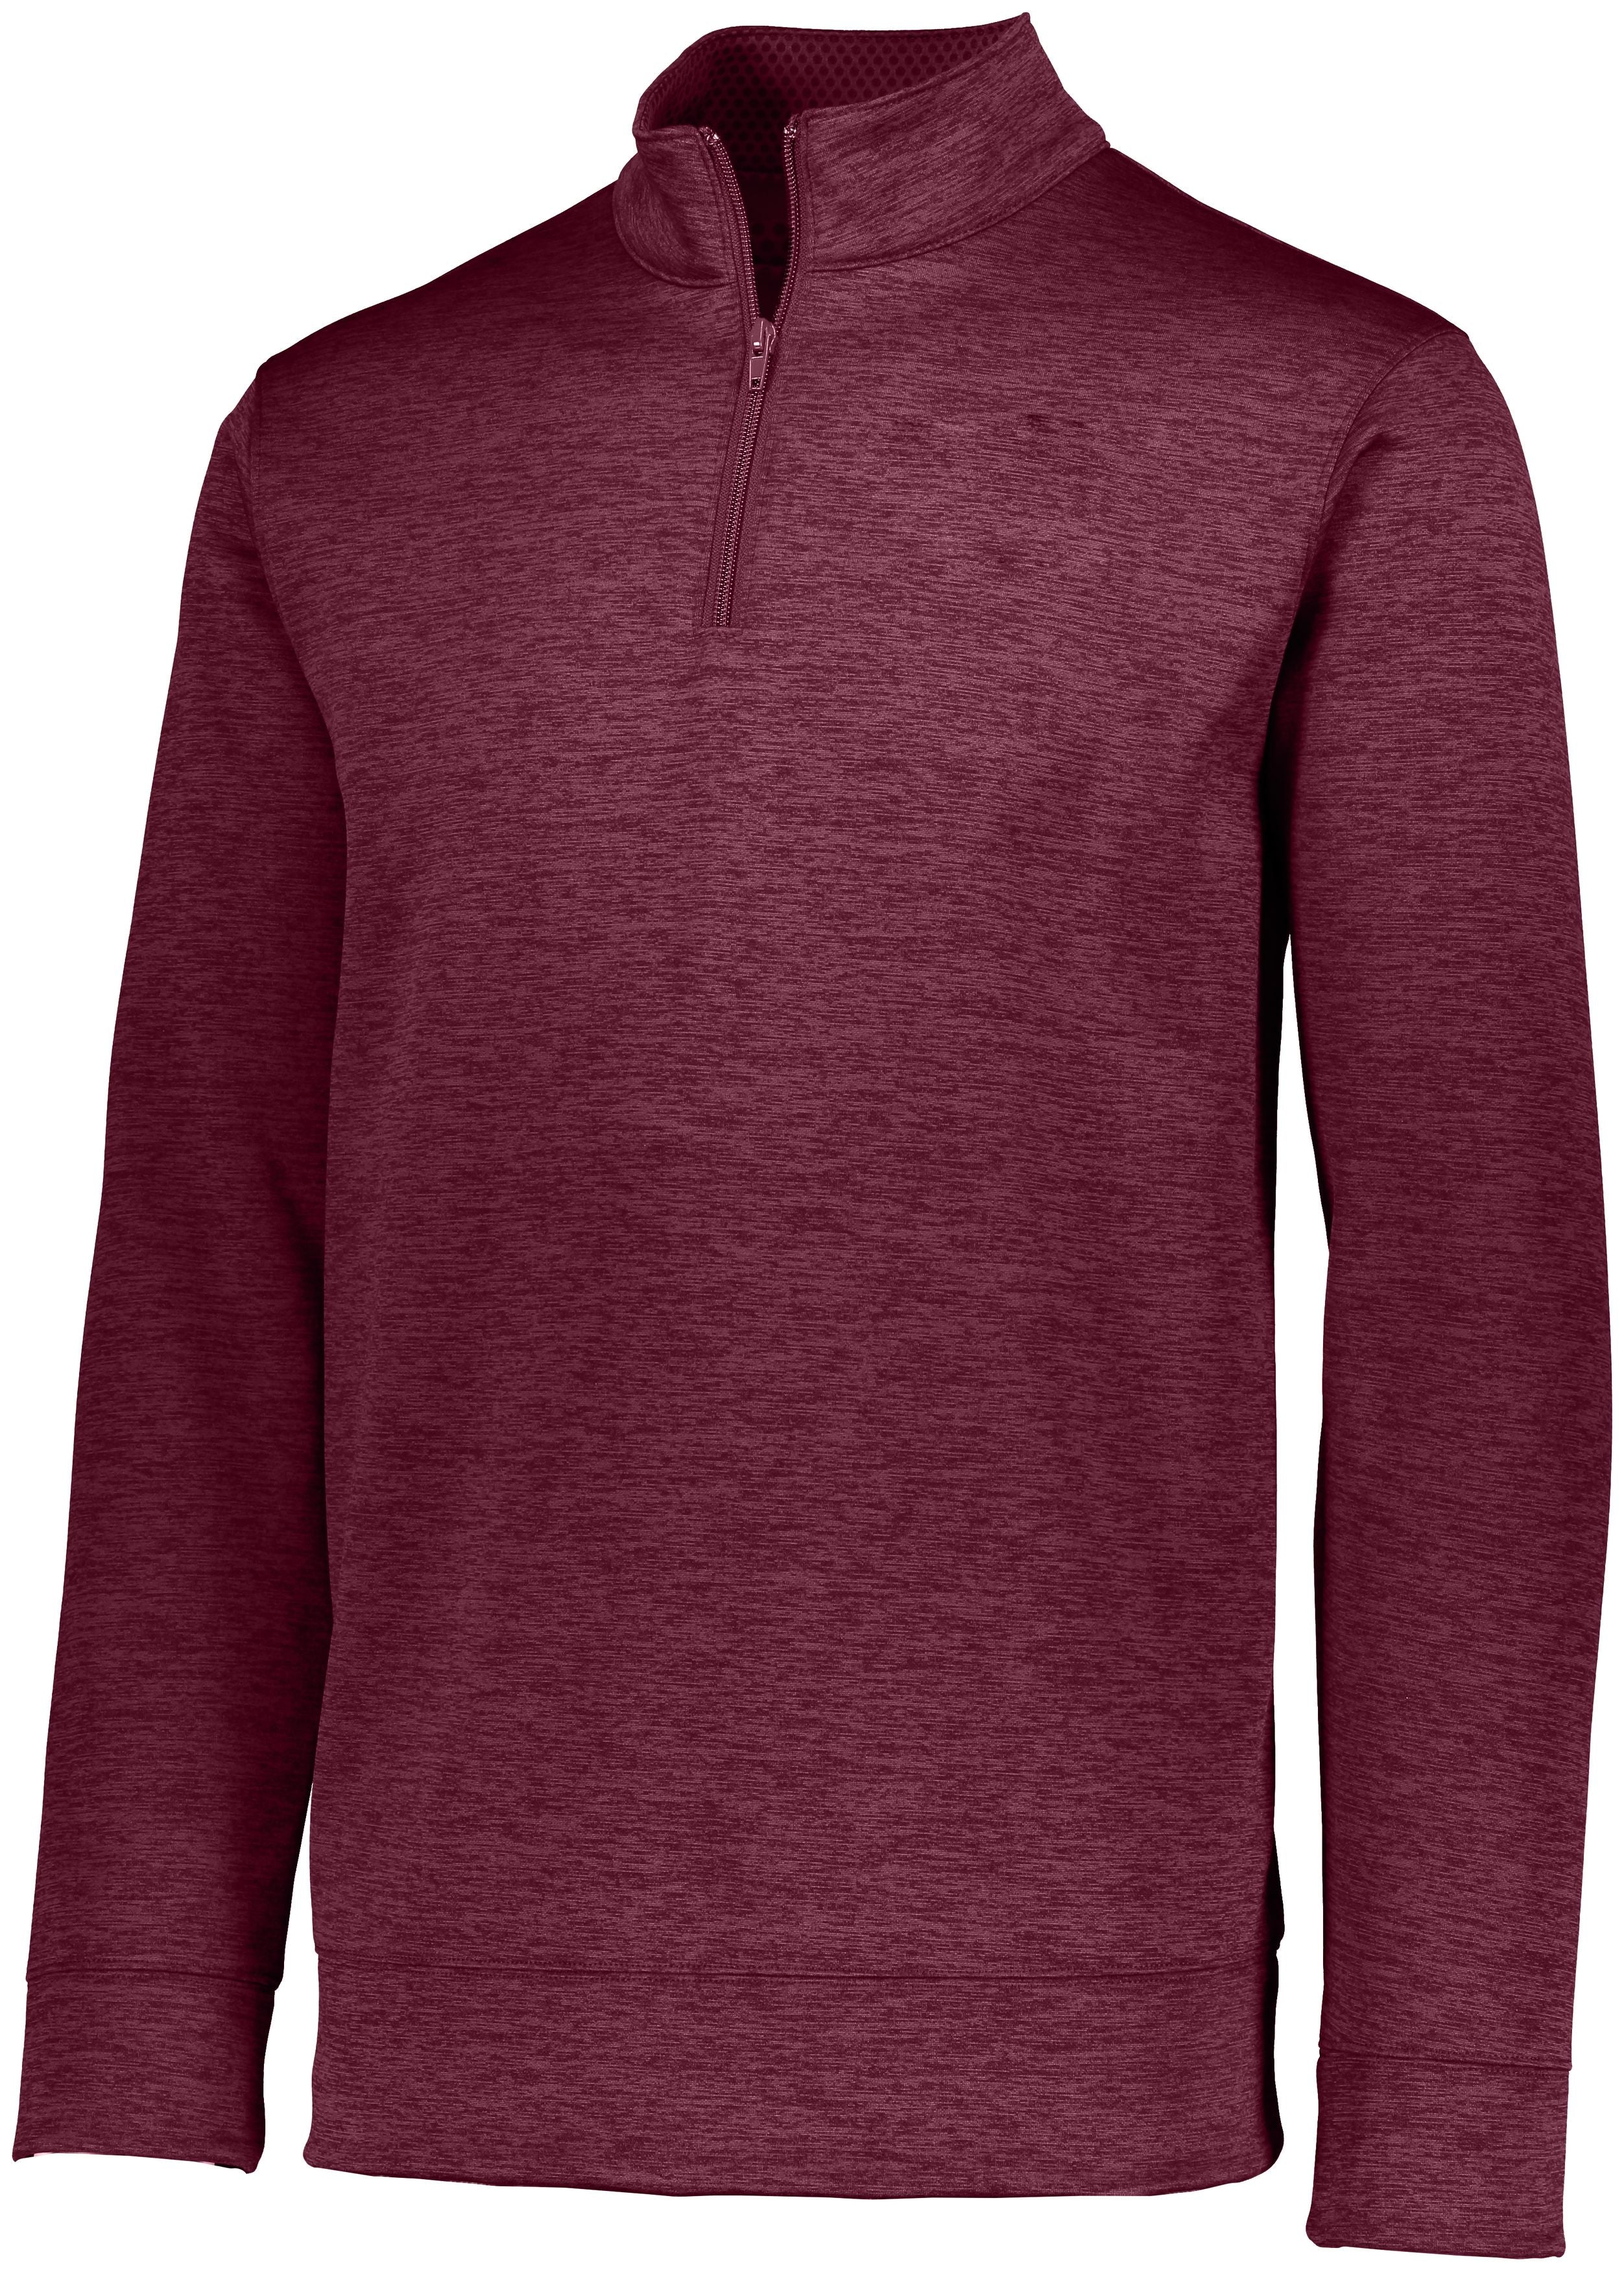 Augusta Sportswear Stoked Tonal Heather Pullover in Maroon  -Part of the Adult, Adult-Pullover, Augusta-Products, Outerwear, Tonal-Fleece-Collection product lines at KanaleyCreations.com